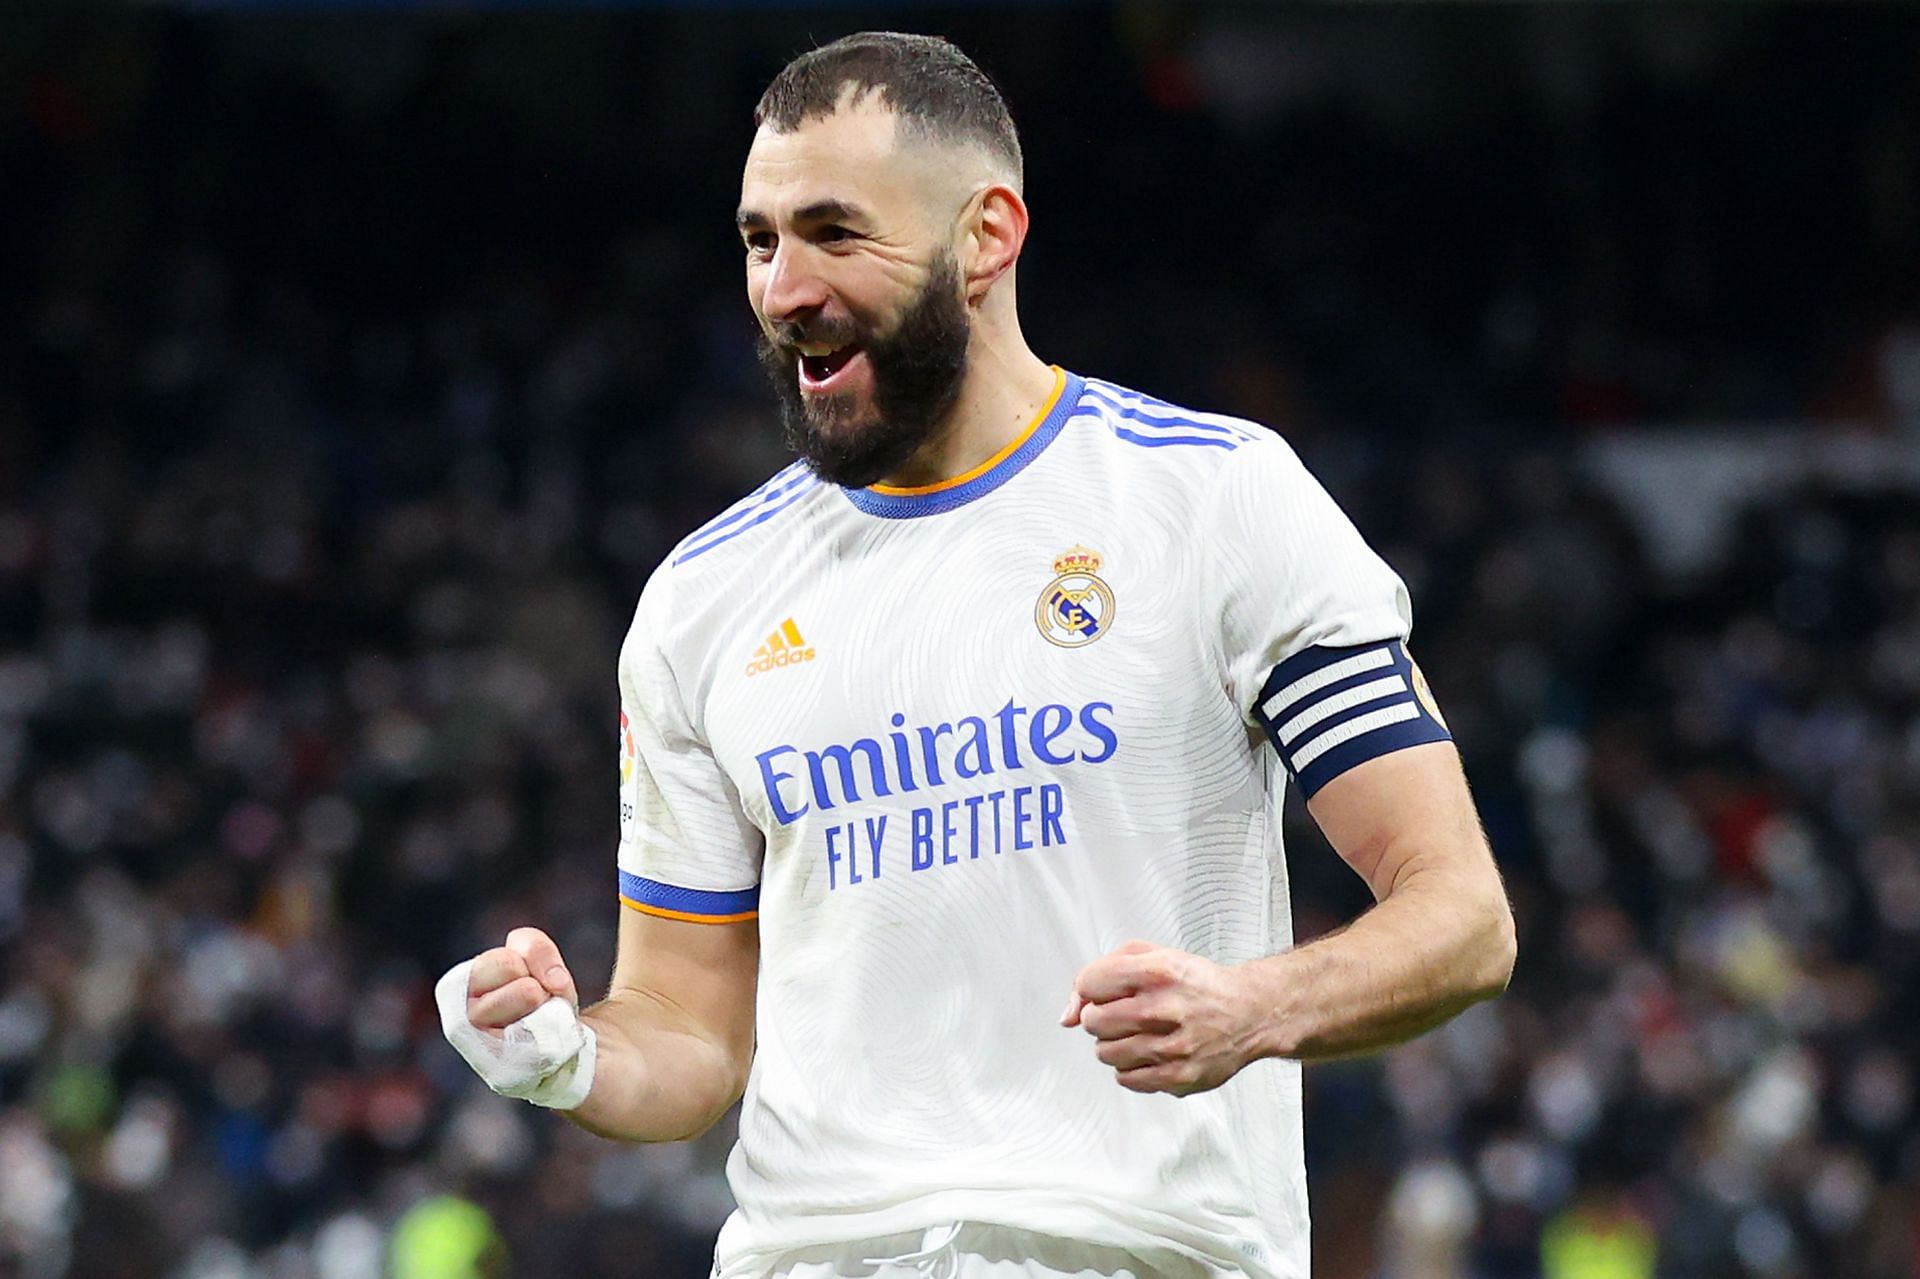 Karim Benzema is in a race against time to regain fitness ahead of the Copa del Rey quarter-final/